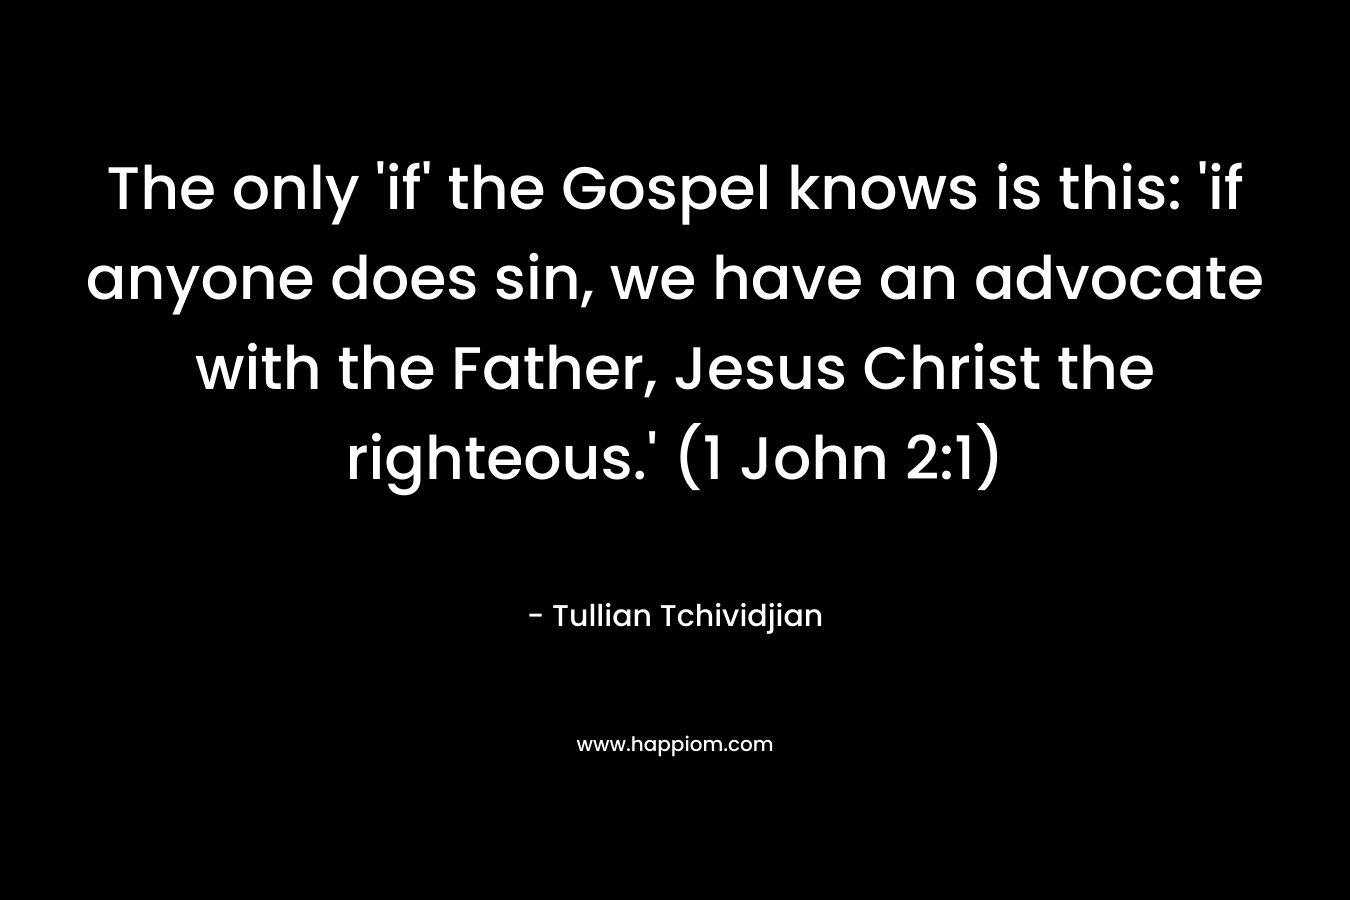 The only 'if' the Gospel knows is this: 'if anyone does sin, we have an advocate with the Father, Jesus Christ the righteous.' (1 John 2:1)